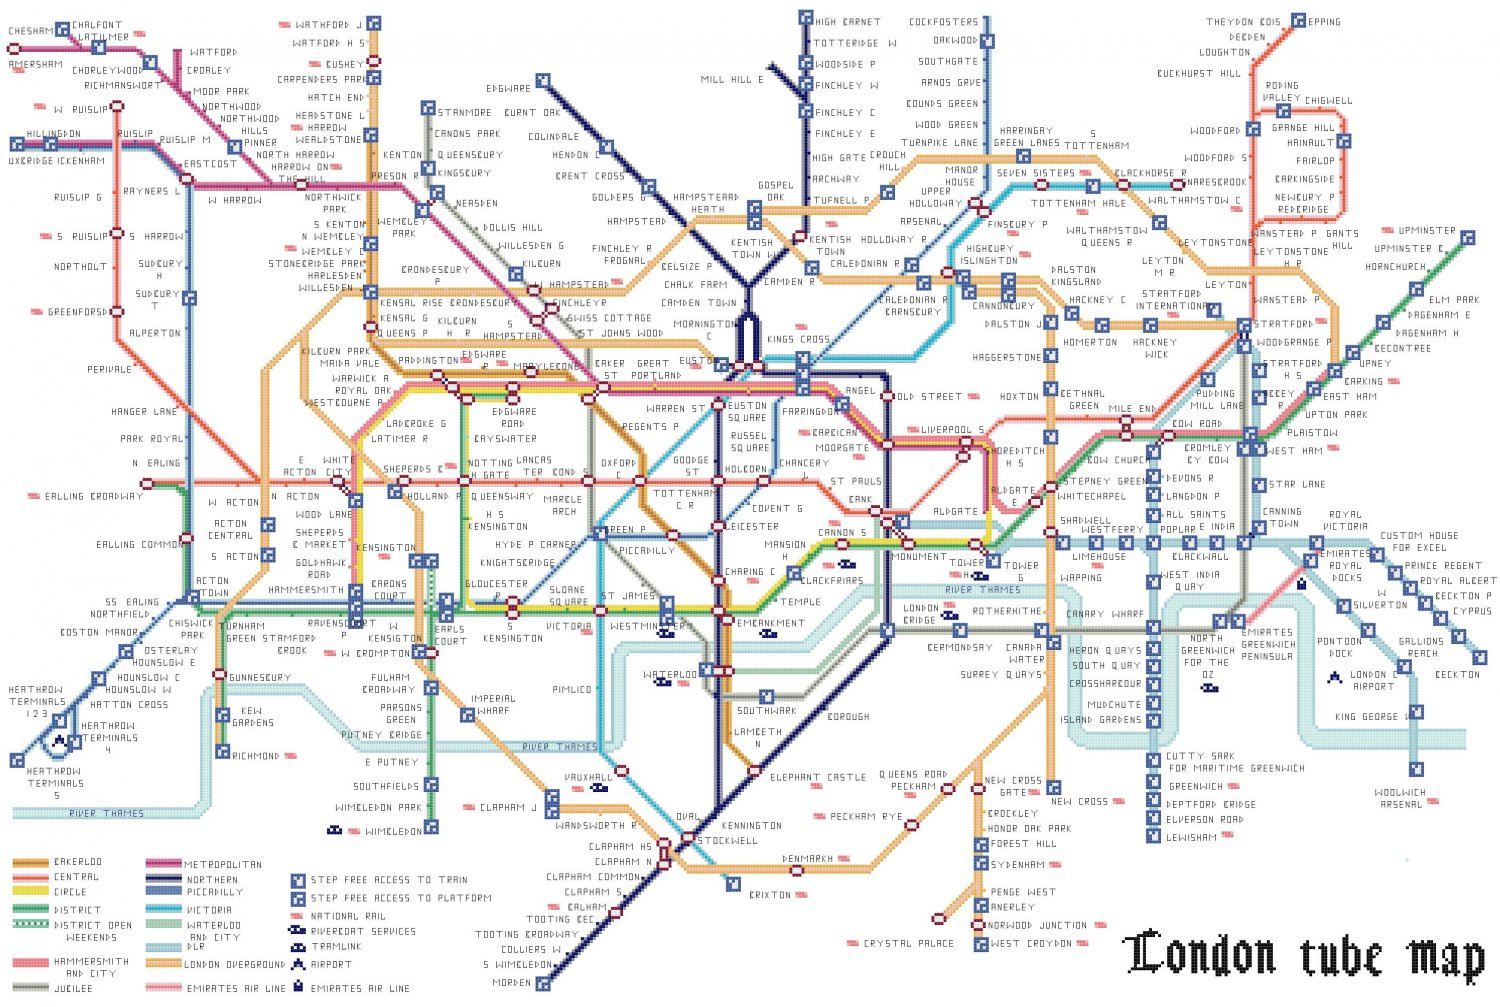 Tube map of london with texts of station - 35.21" x 23.29" - Cross Stitch Pattern Pdf E1178